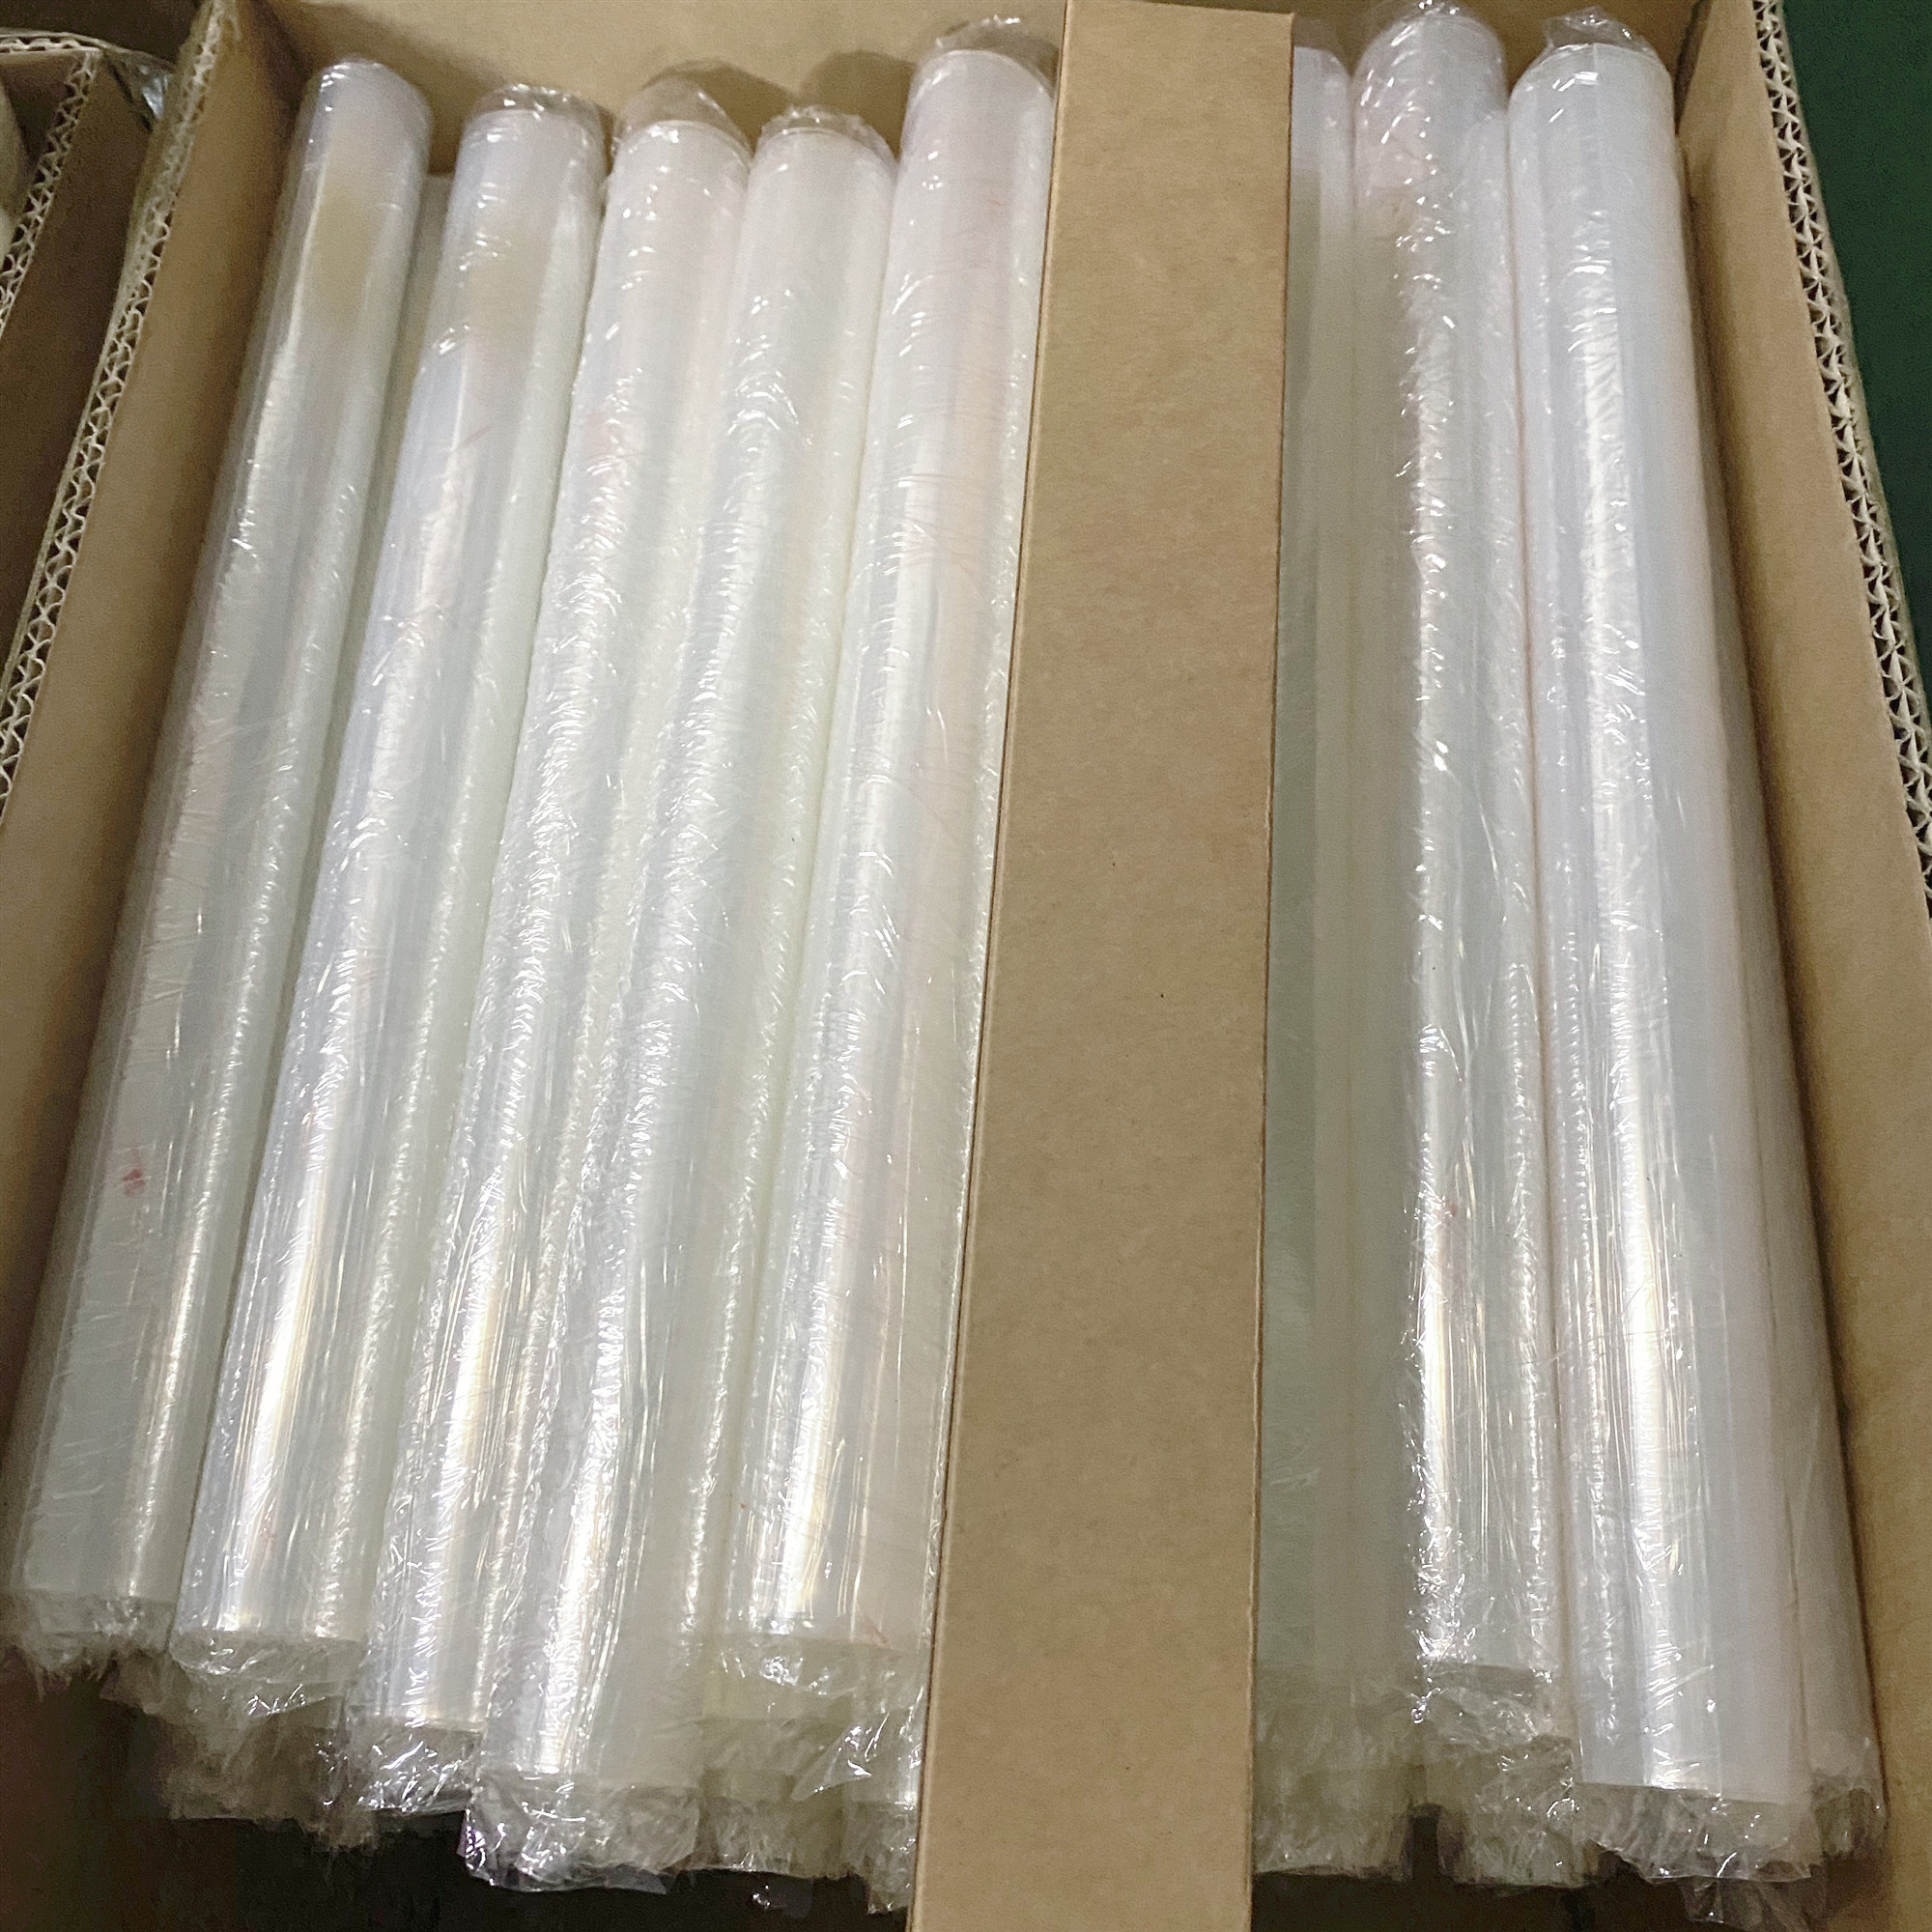 Thick Adhesive Transparent Silicone Rubber Sheet For Gasket